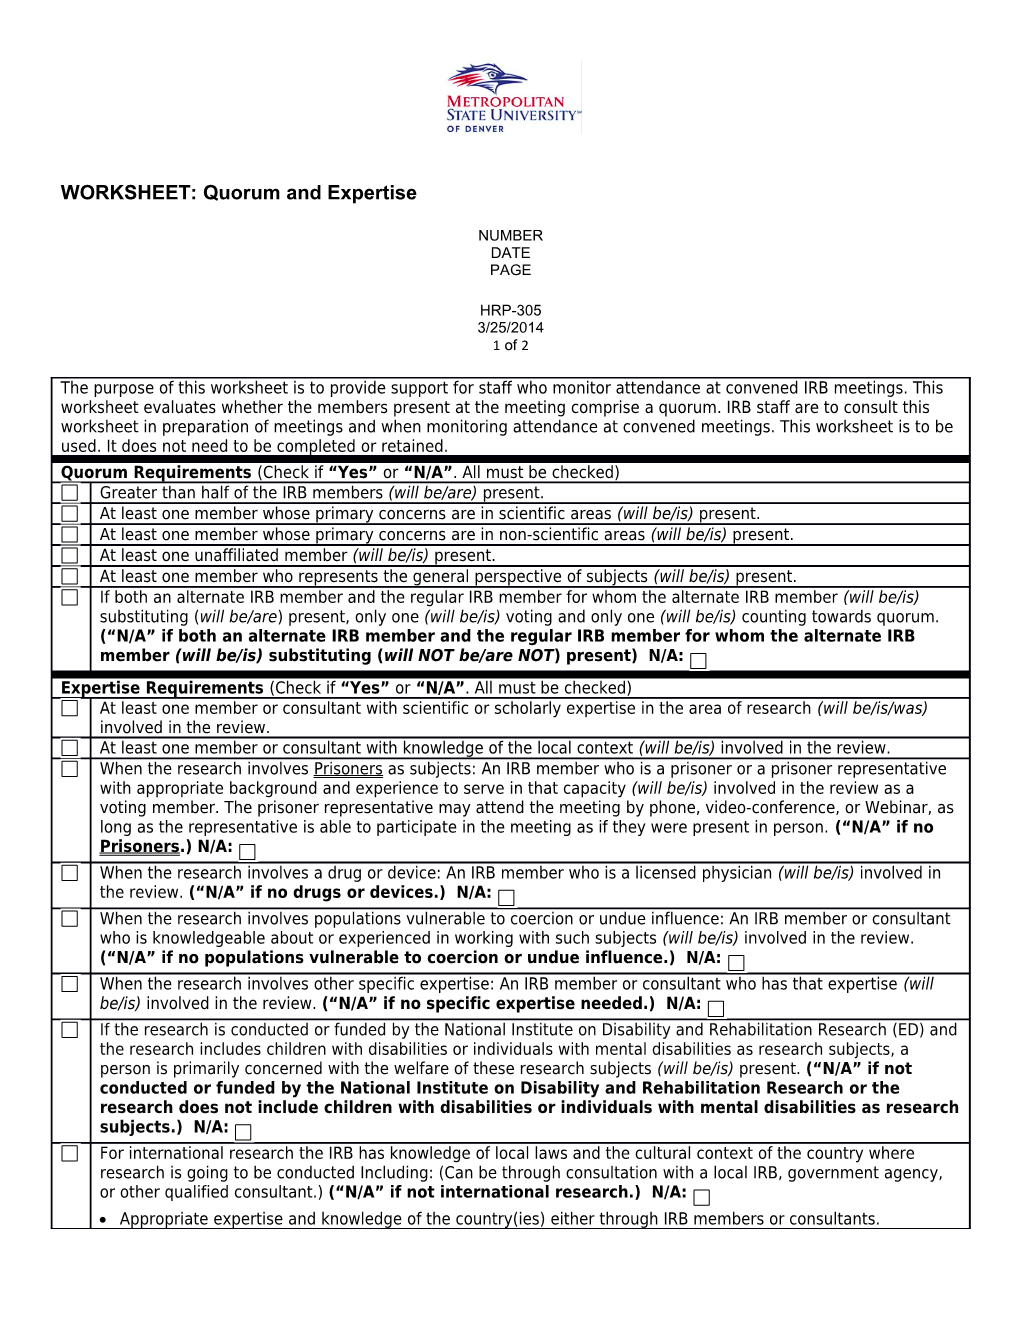 WORKSHEET: Quorum and Expertise